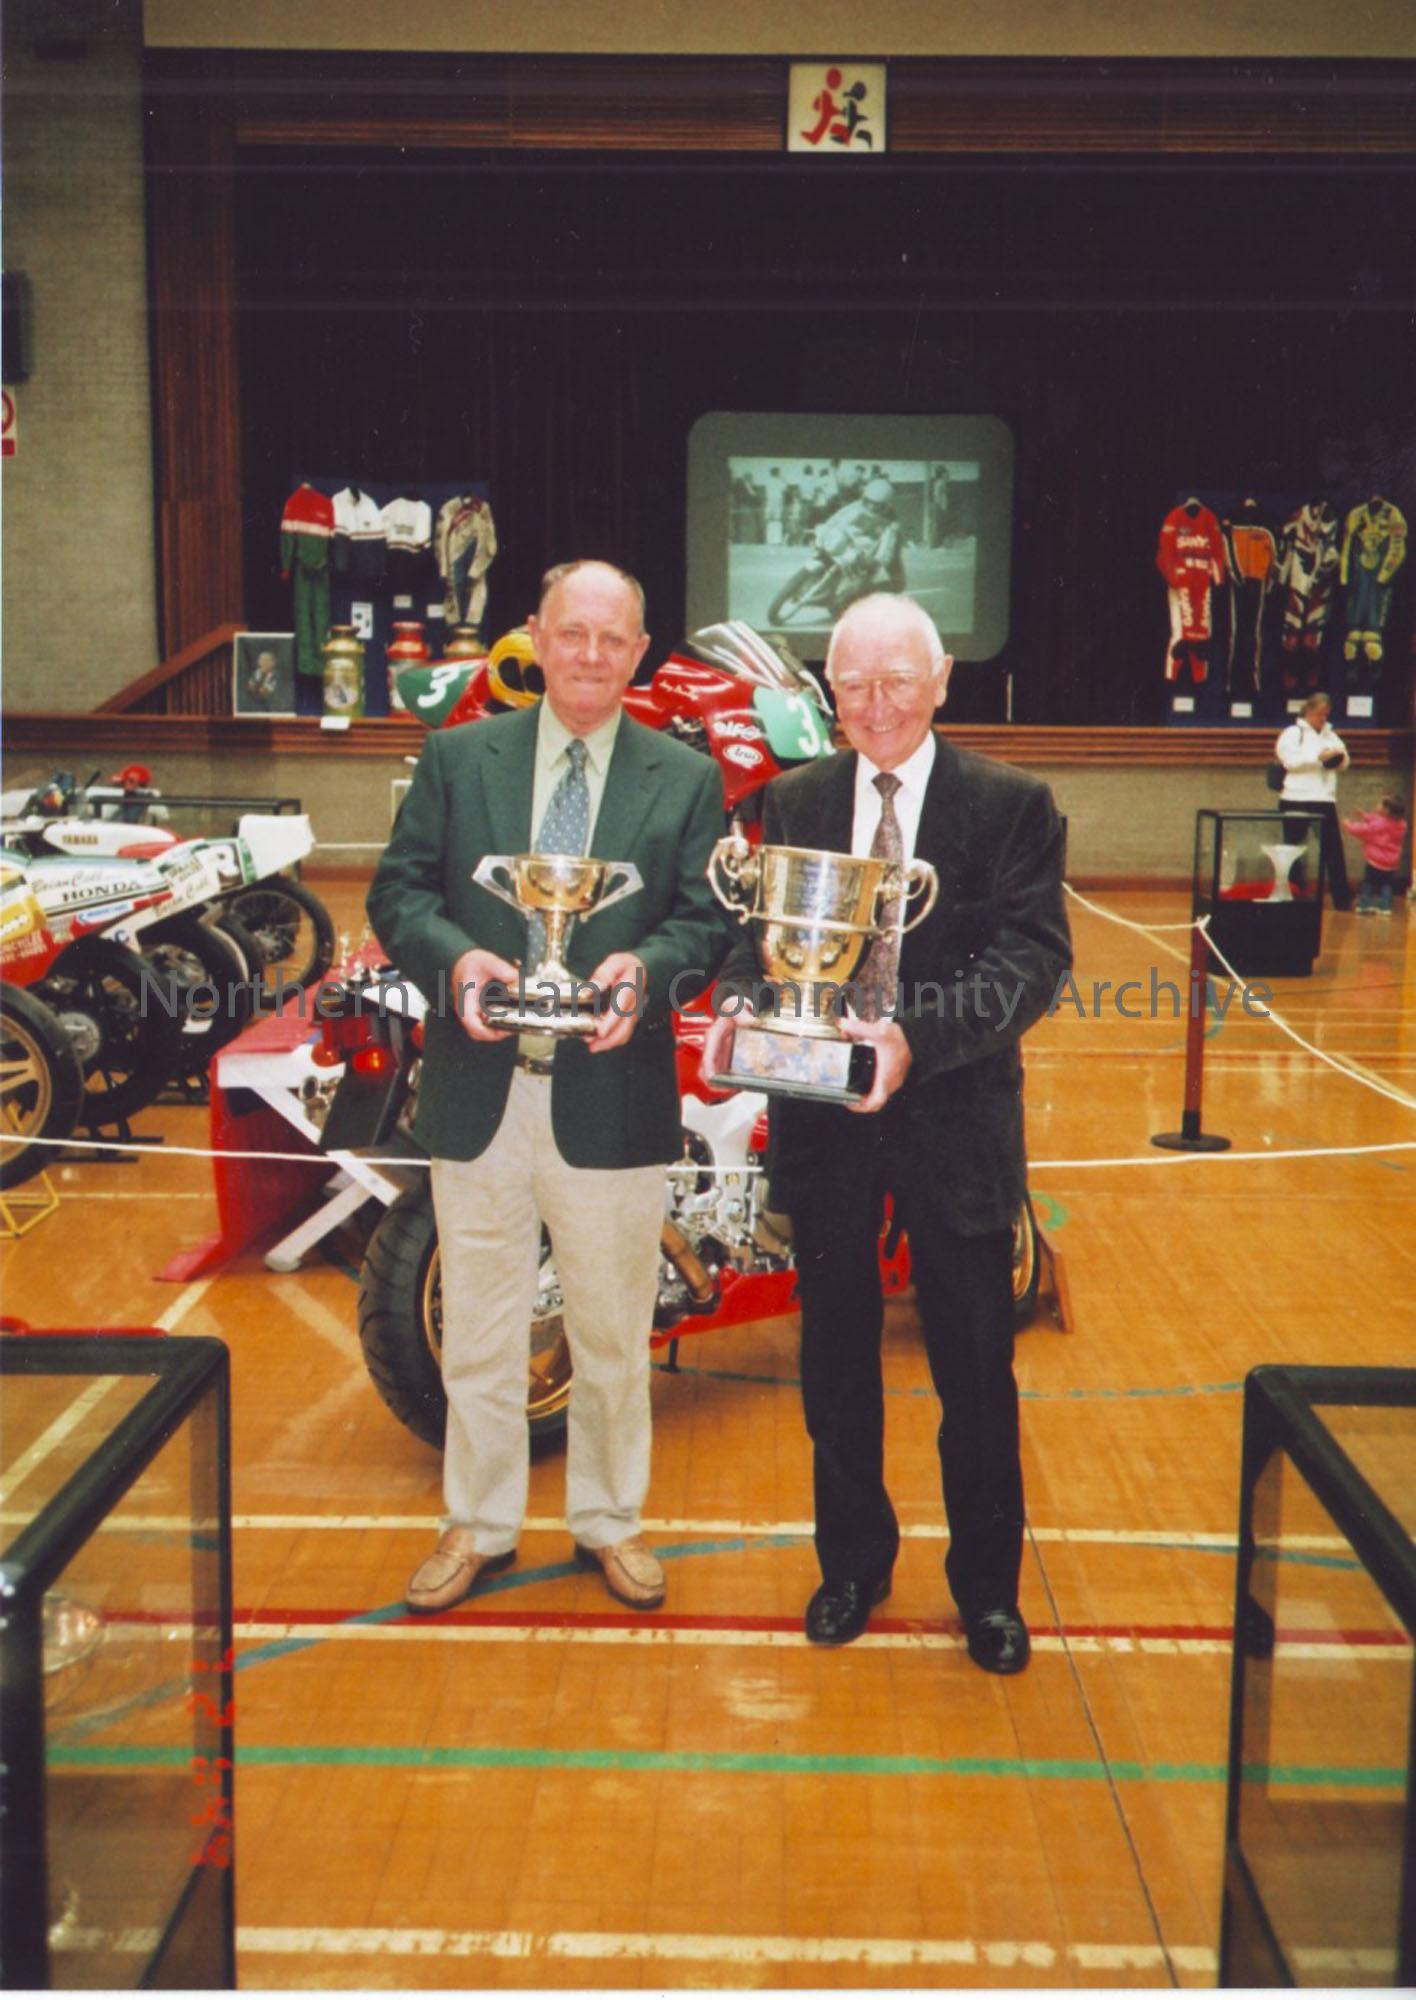 Photographs from Joey Dunlop exhibition May 2003. Photos include, Manxman Alan (W.A) Holmes (Dark Suit) with long time friend, local resident Jim McDe…